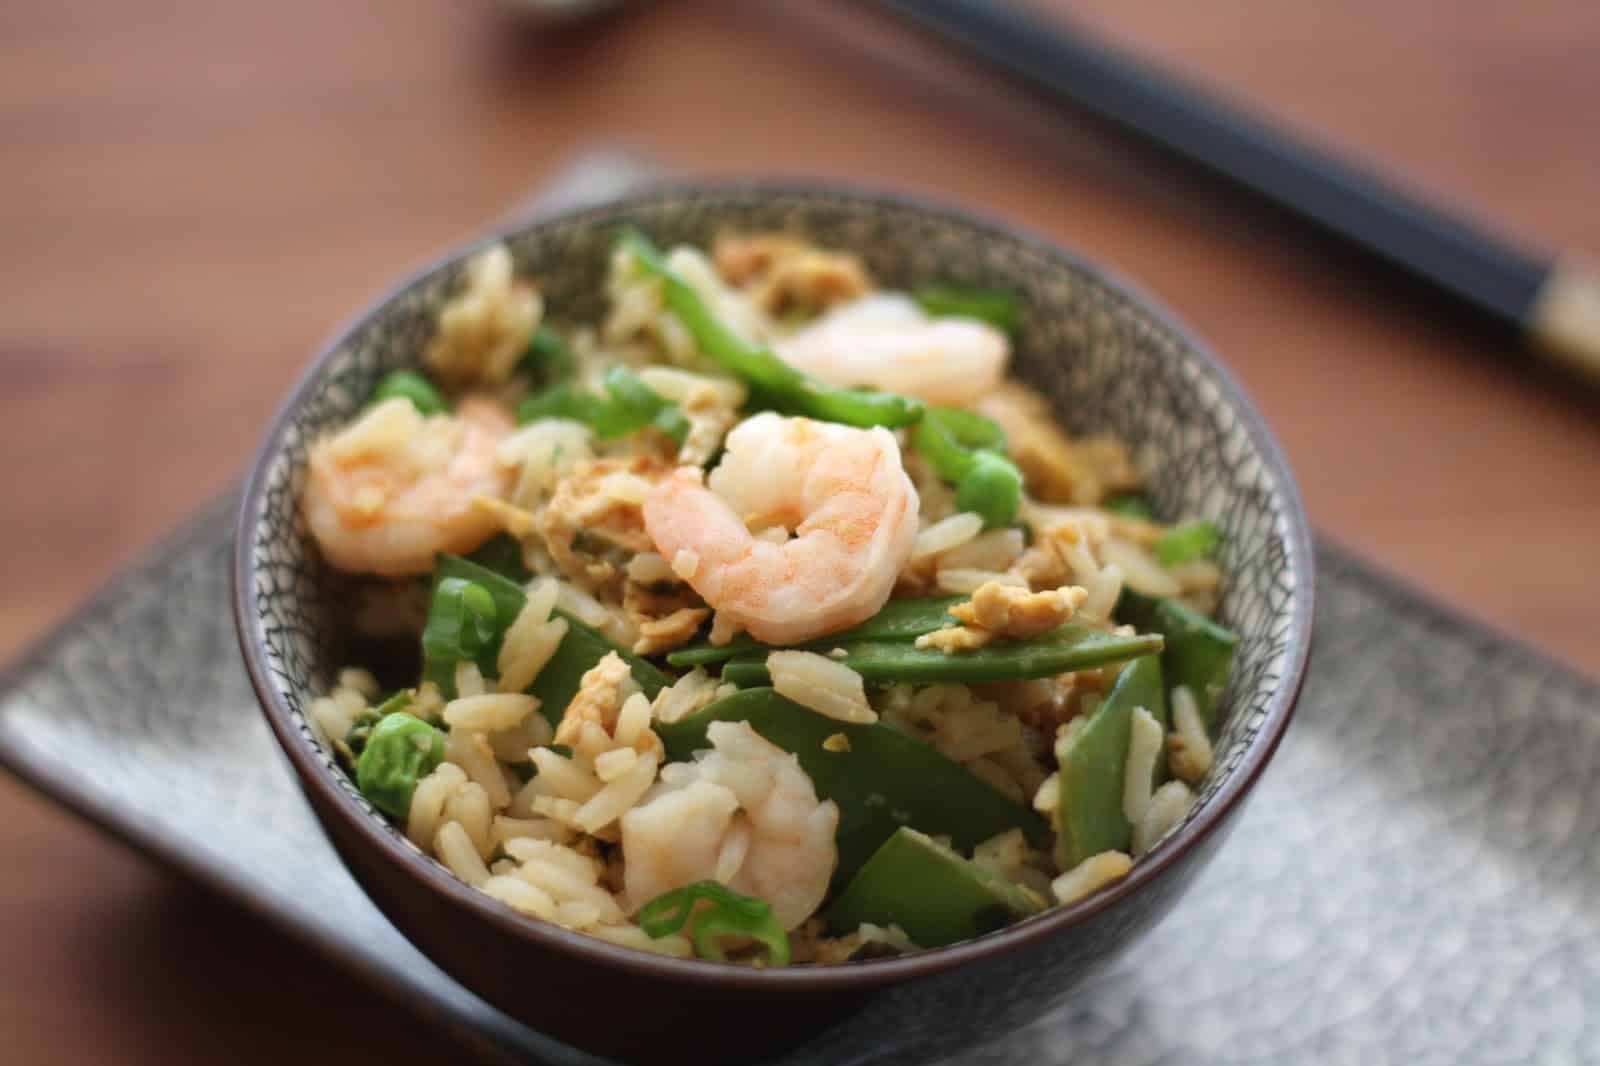 Shrimp and Vegetable Fried Rice